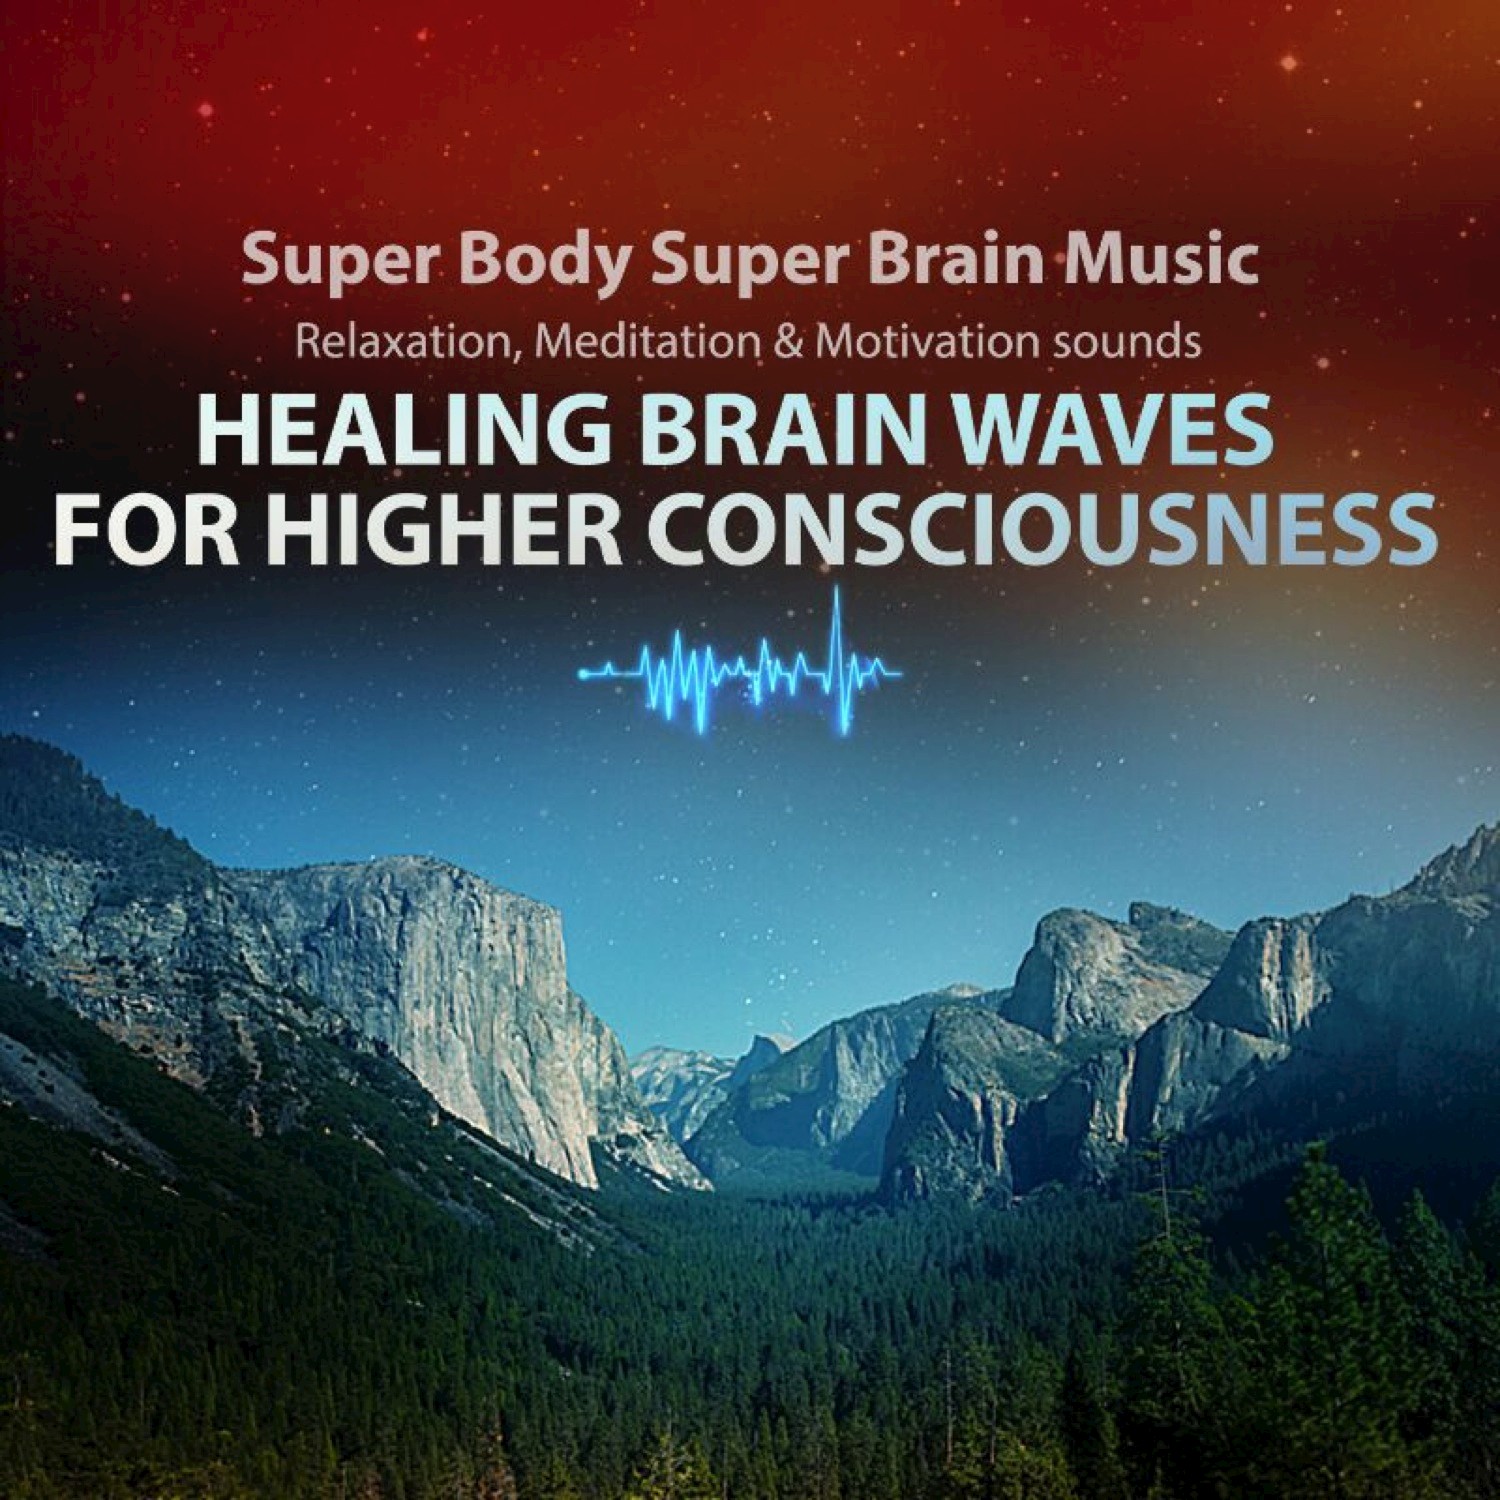 Healing Brain Waves for Higher Consciousness